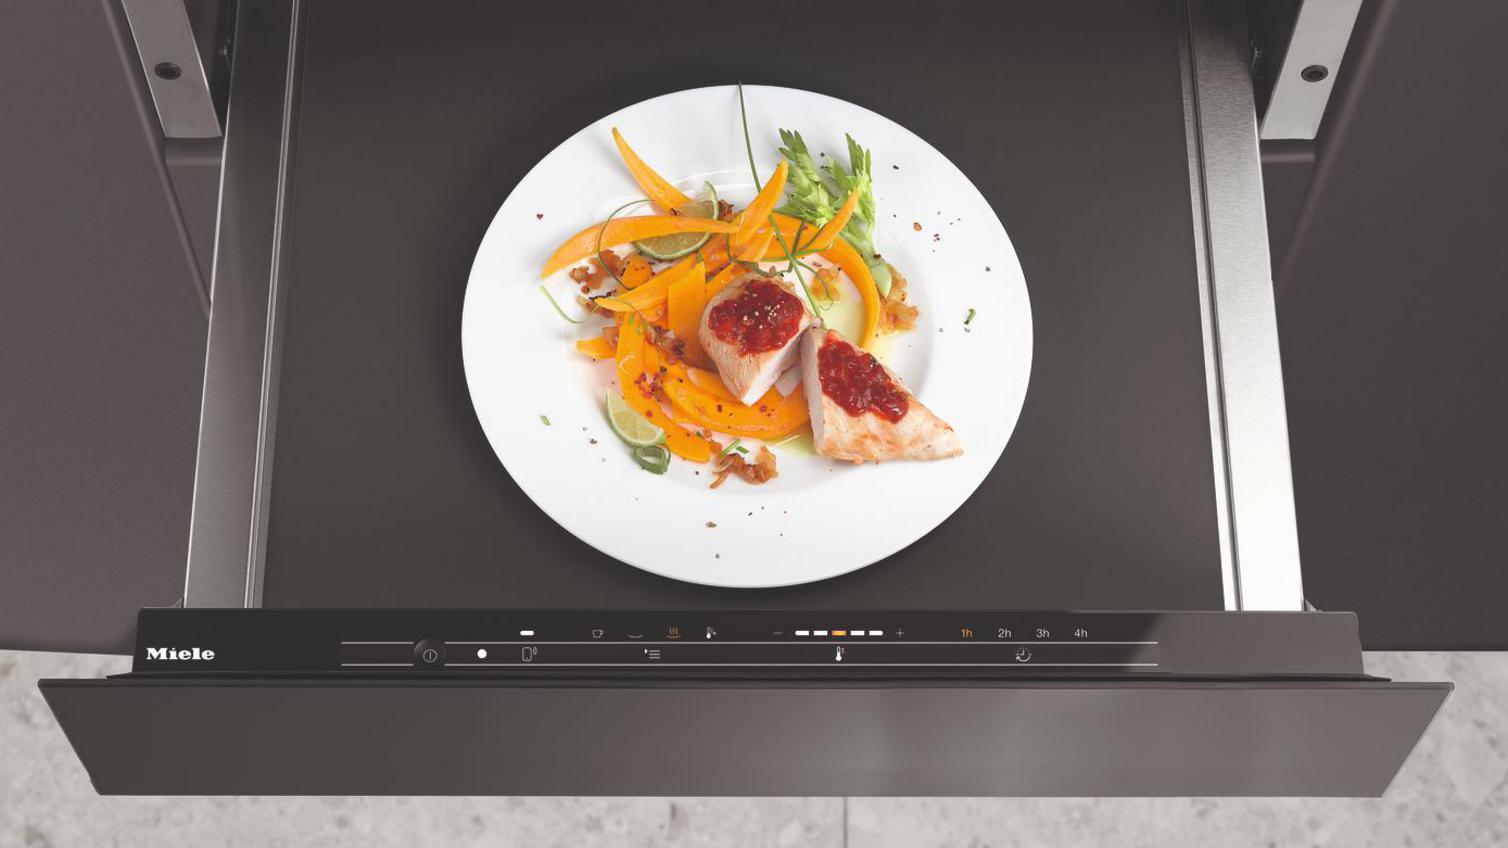 Miele ESW7010 warming drawer with a plate of cooked food